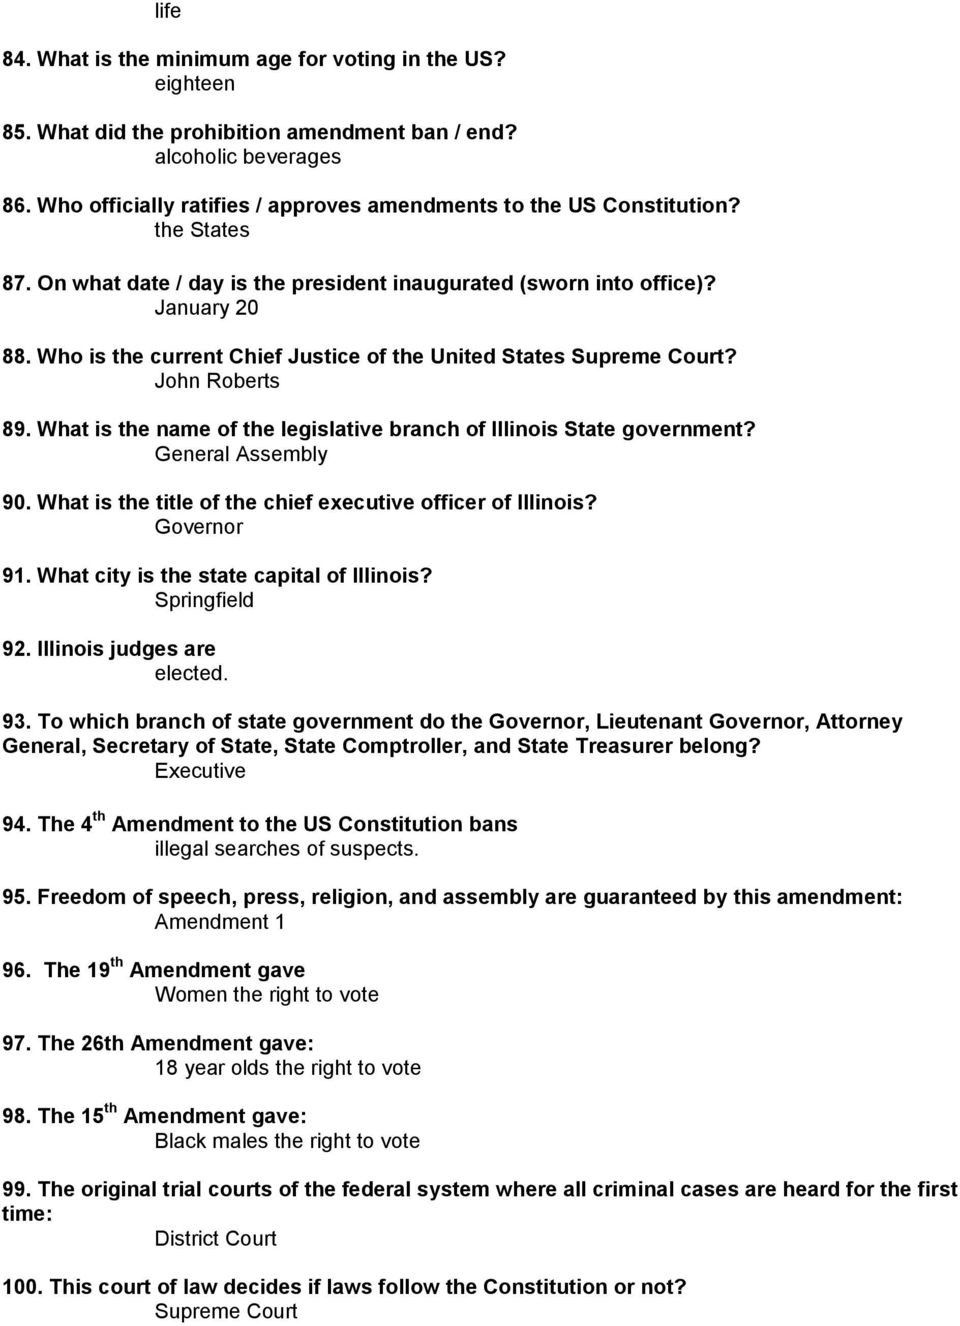 The Us Constitution Worksheet Answers the Us Constitution Worksheet Virginia Plan Answers